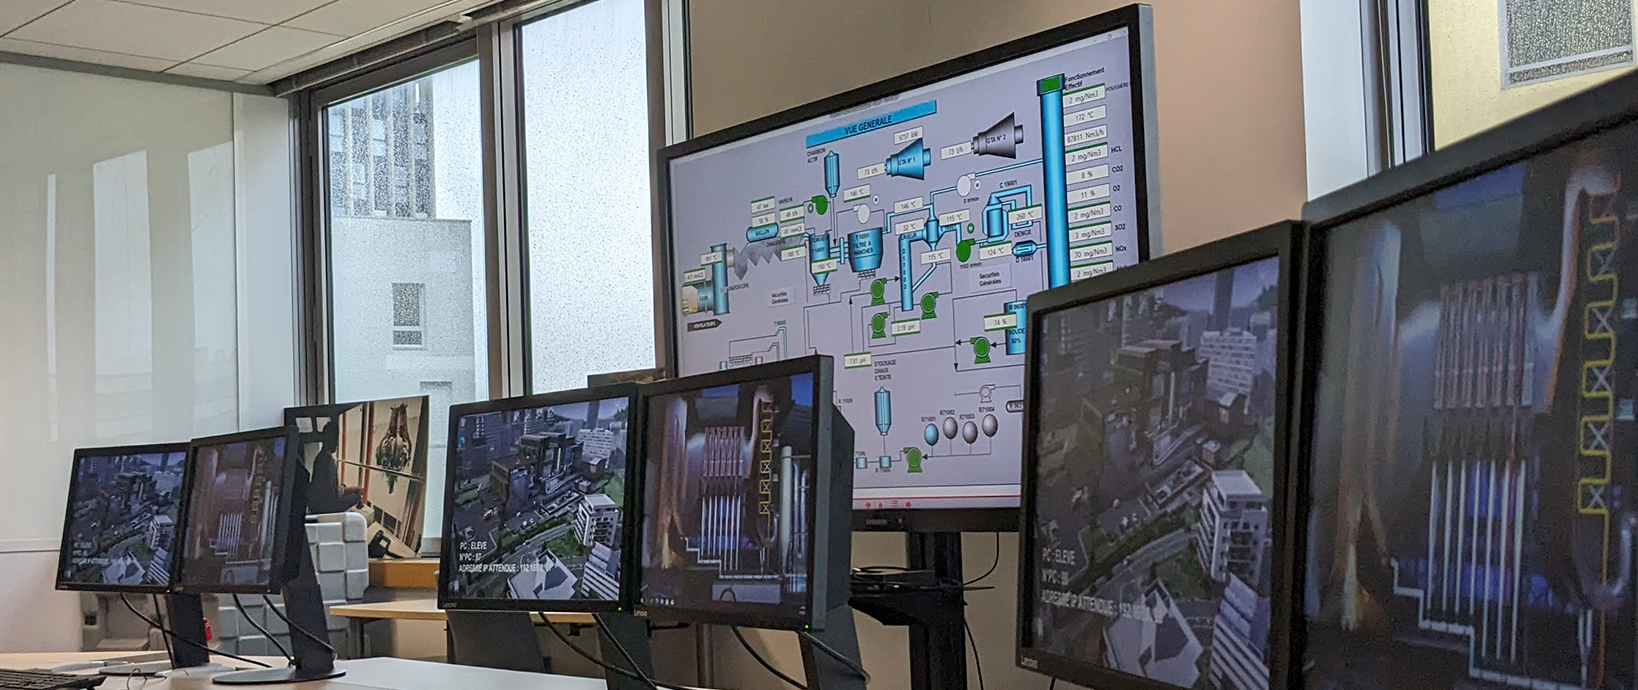 campus veolia upgrades its simulator and opens up cloud access